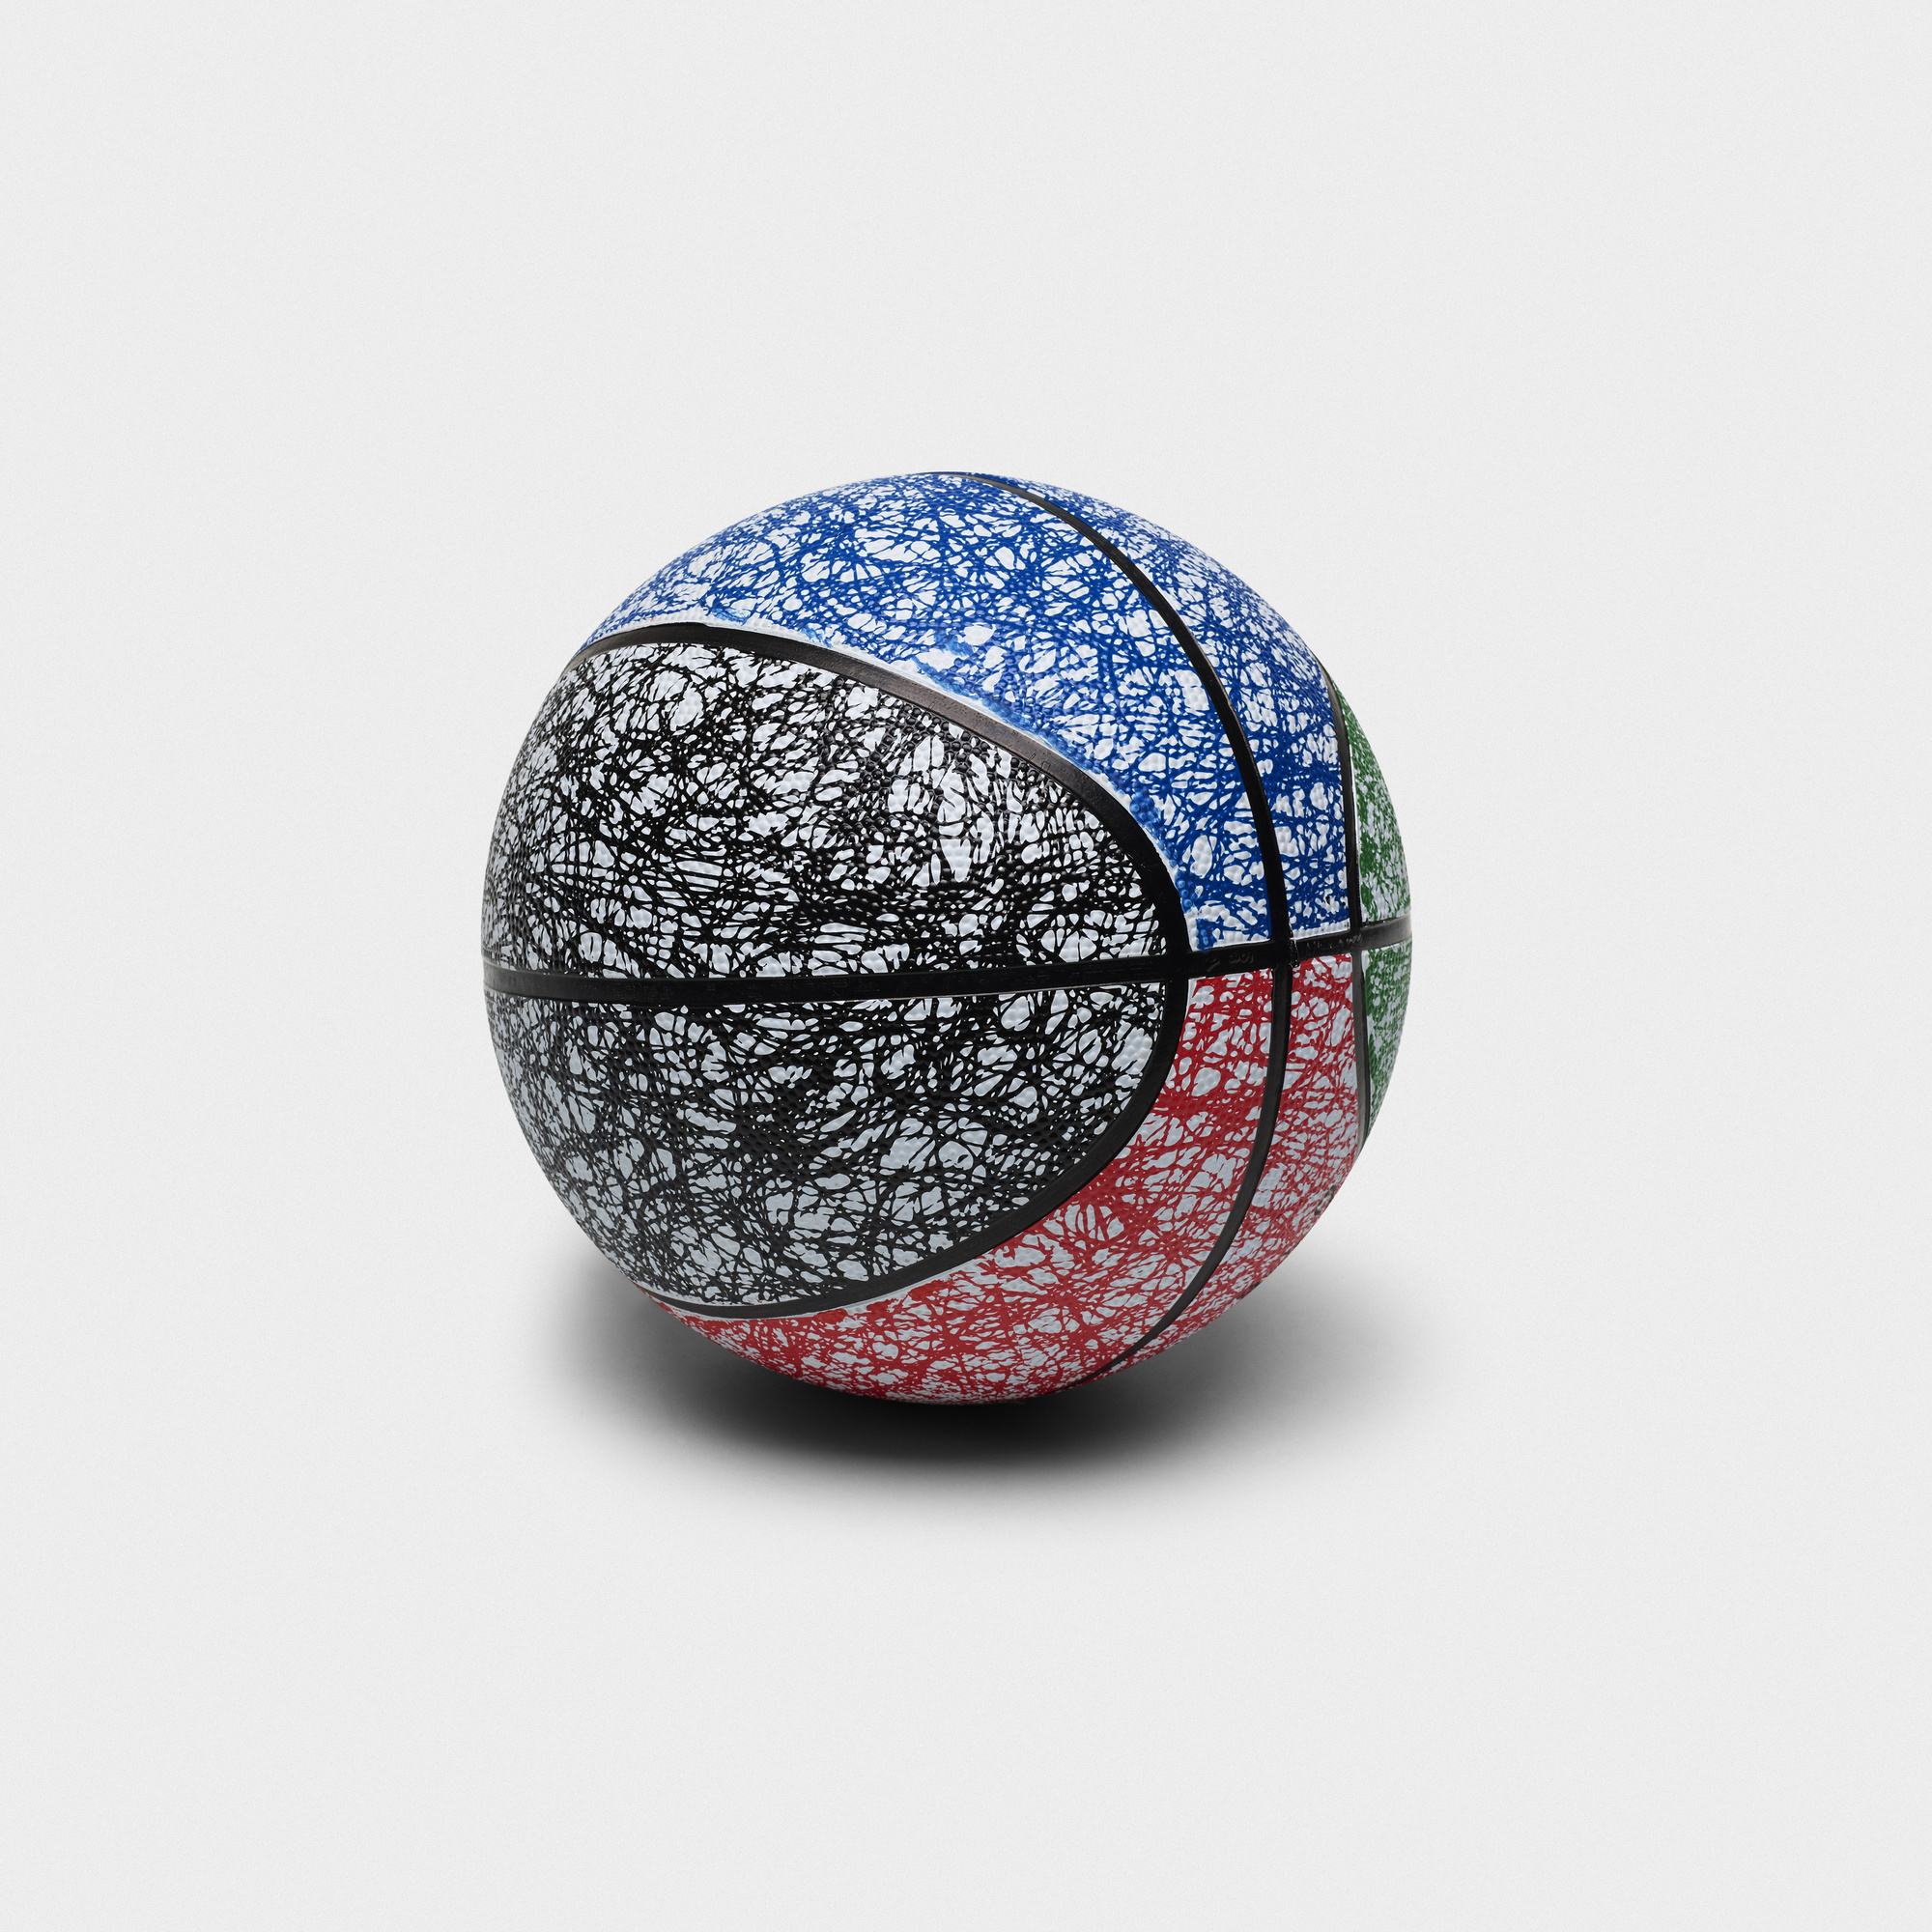 The Art And Design In A Sports Ball